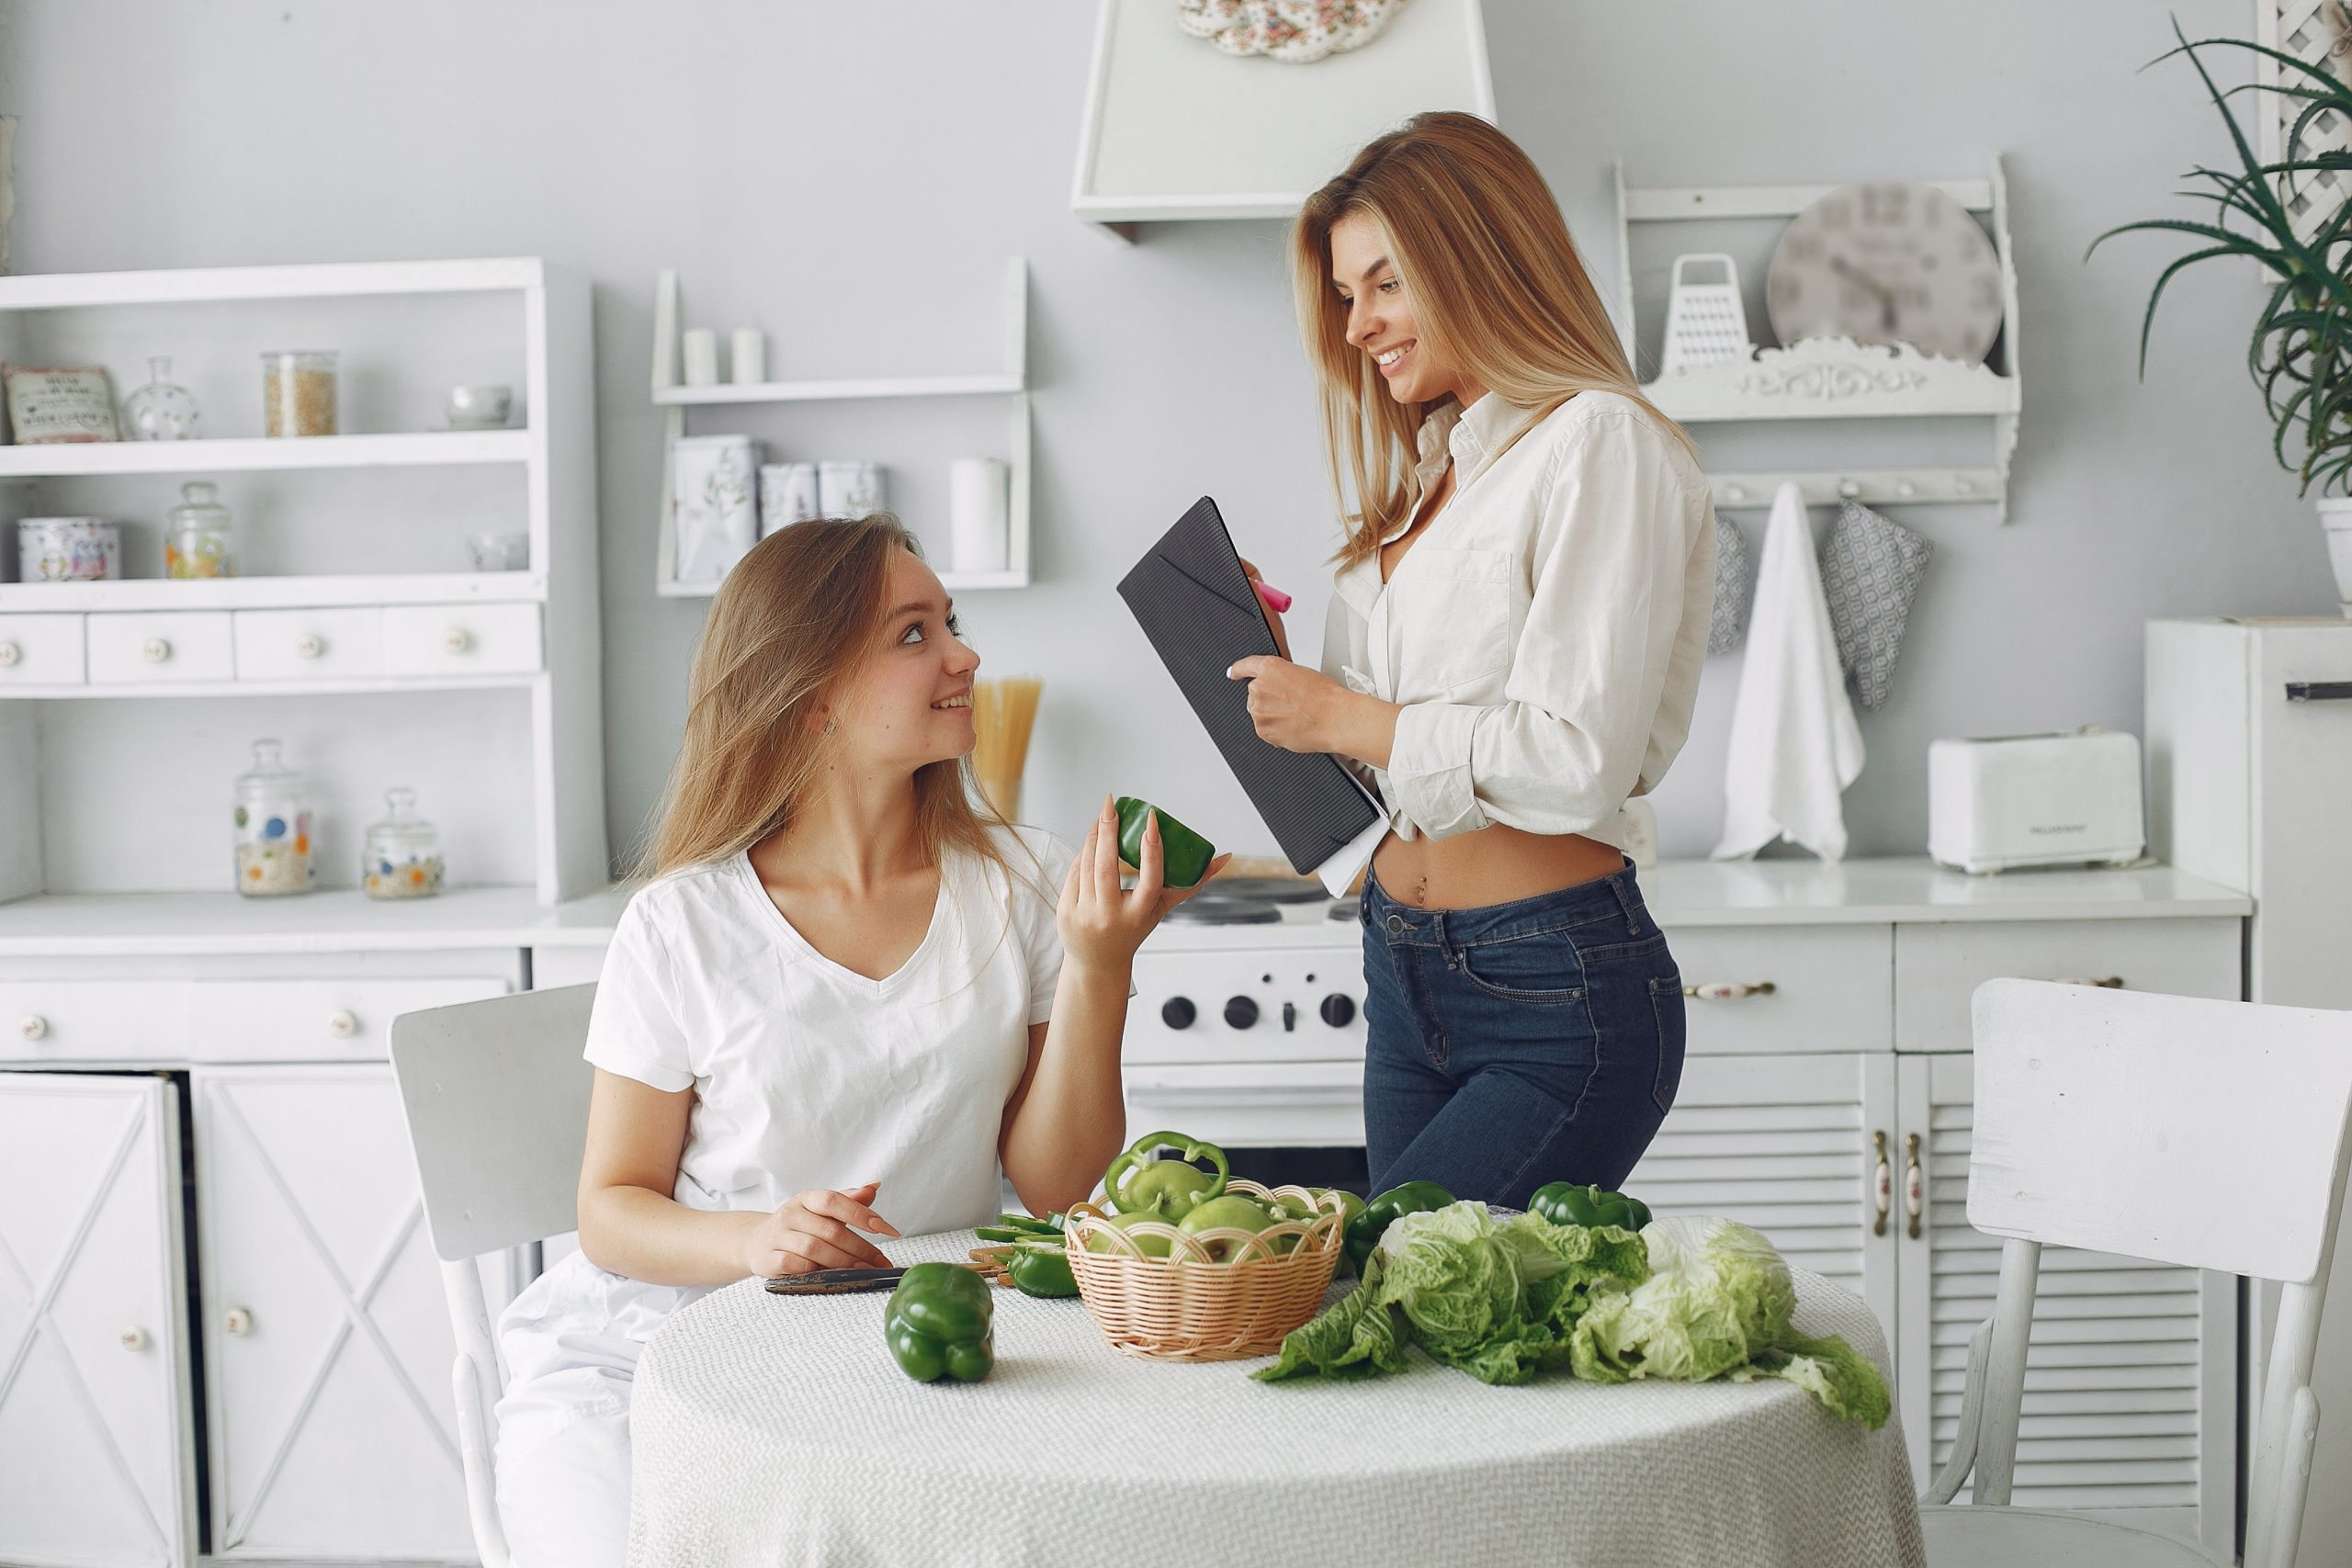 Beautiful and sporty girls in a kitchen with a vegetables